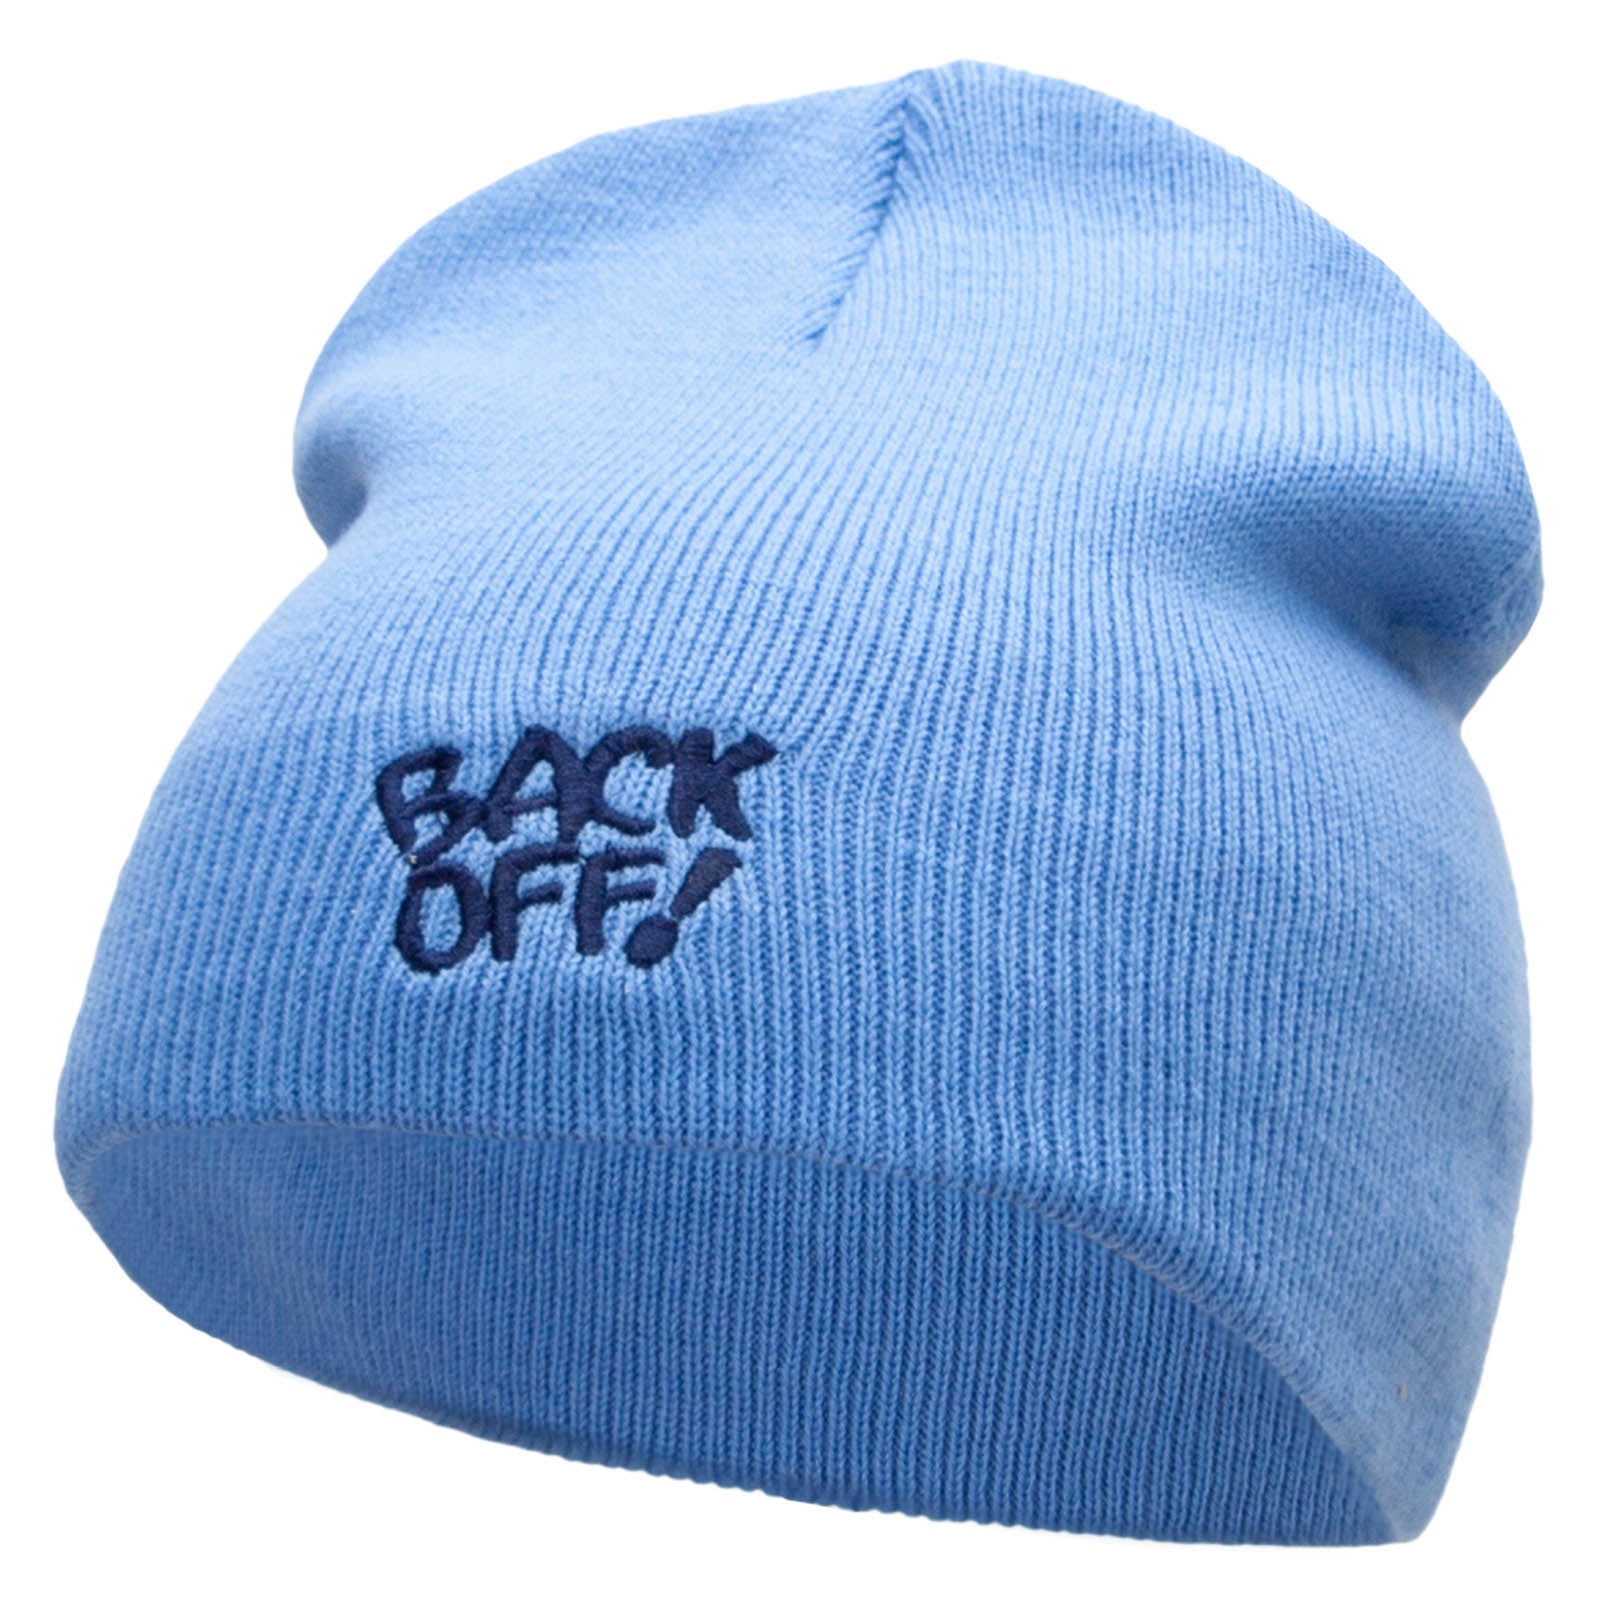 Back Off Saying Embroidered Short Beanie - Sky Blue OSFM